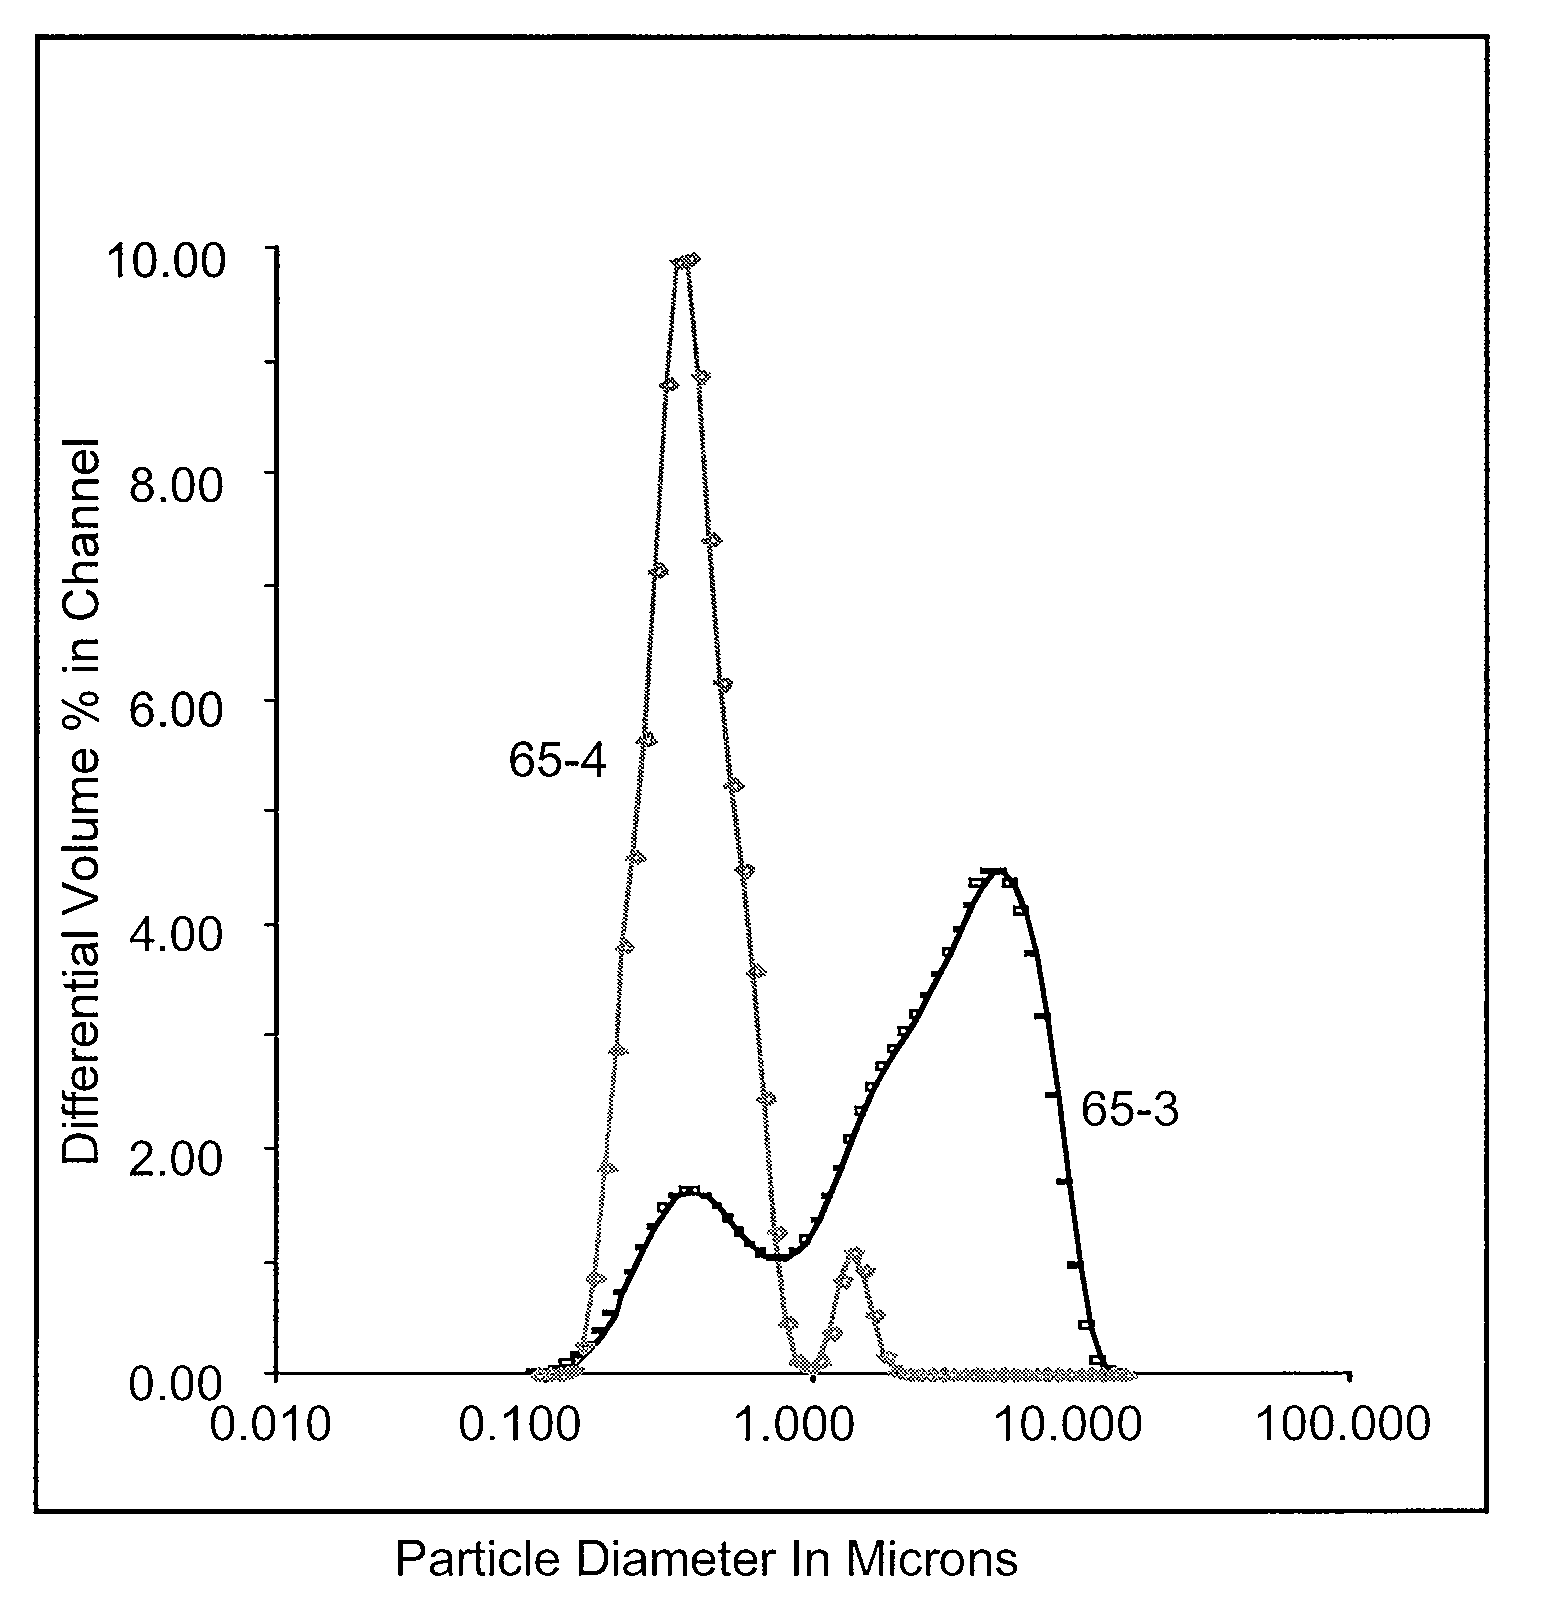 Hollow organic/inorganic composite fibers, sintered fibers, methods of making such fibers, gas separation modules incorporating such fibers, and methods of using such modules